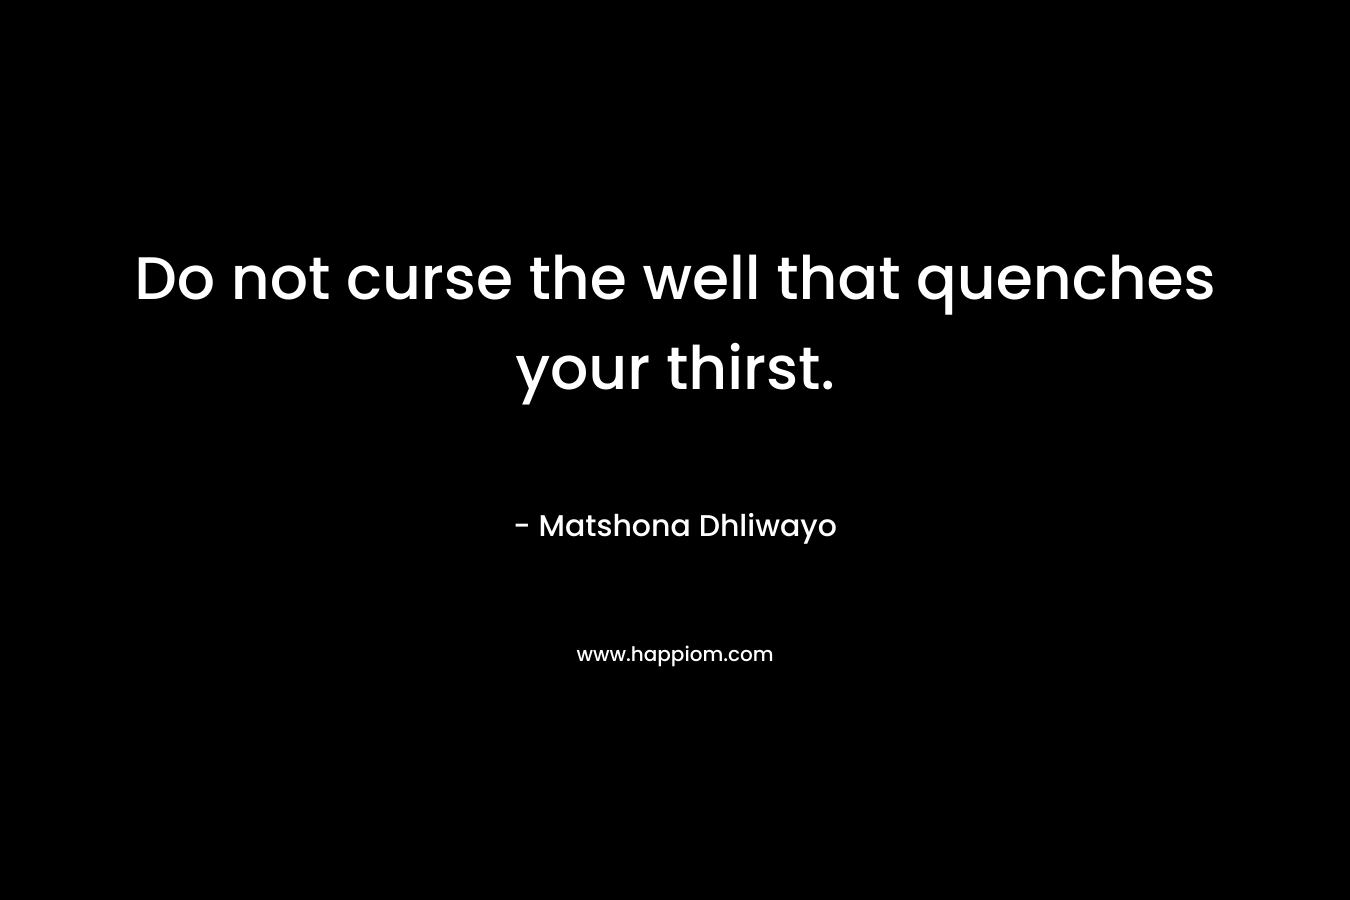 Do not curse the well that quenches your thirst.